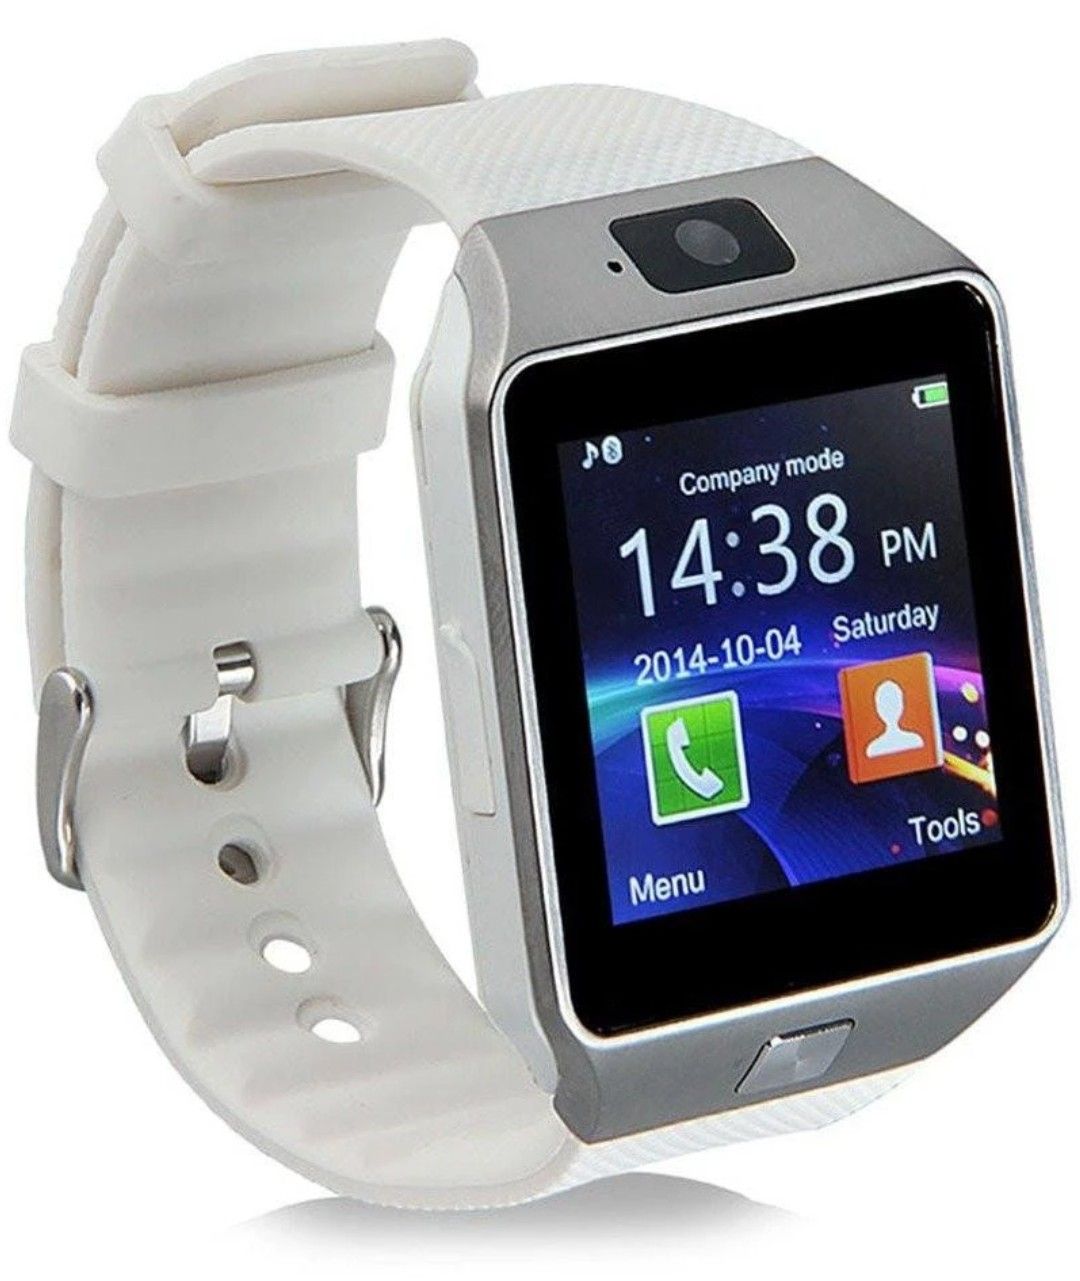 White smart watch with camera